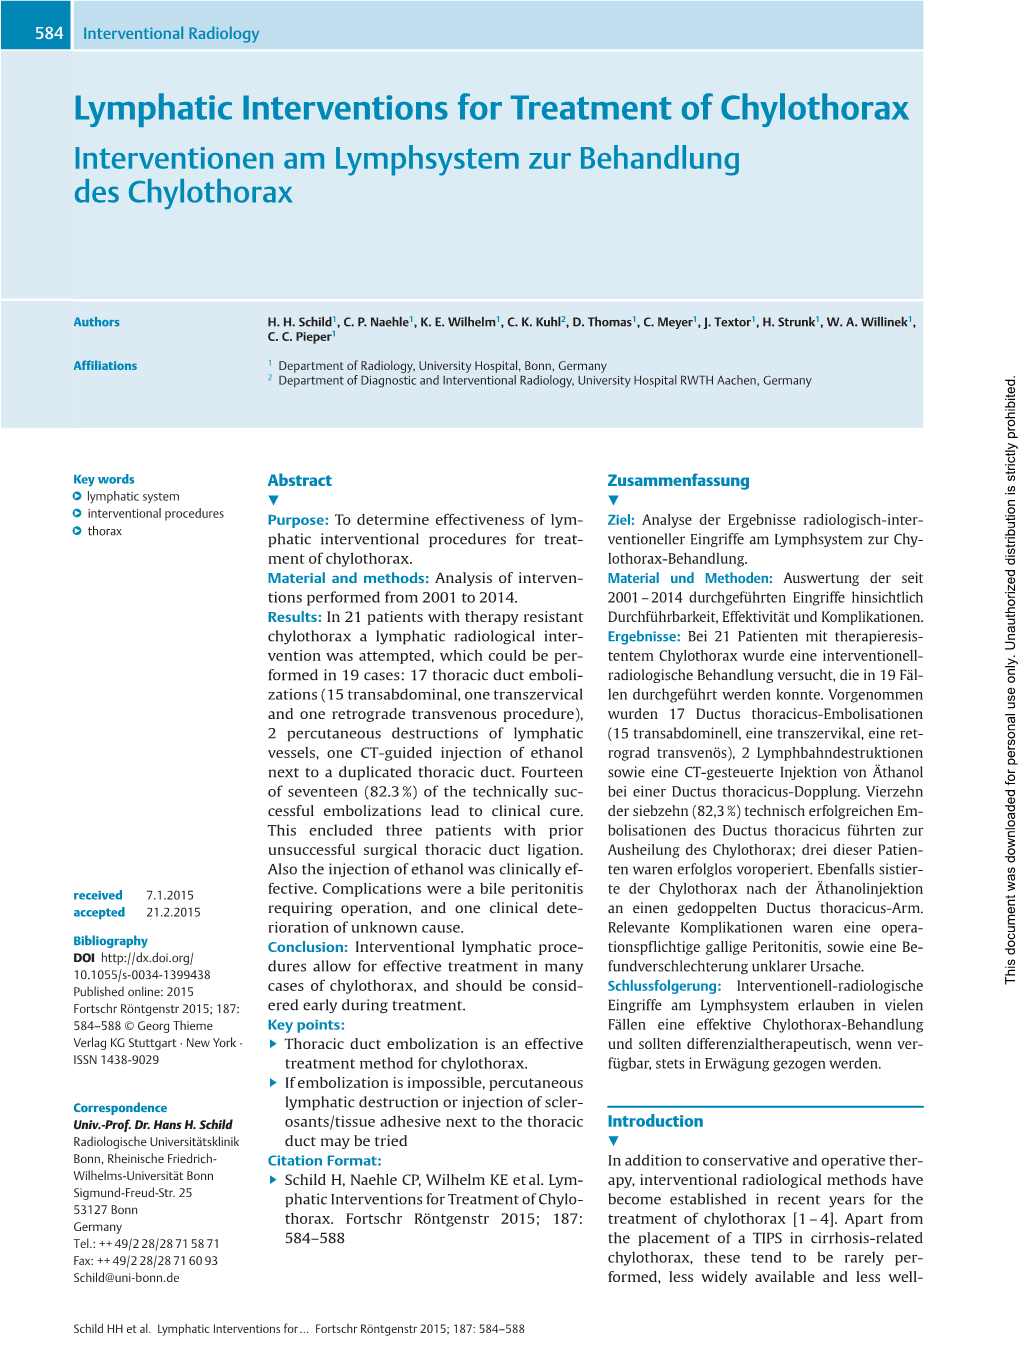 Lymphatic Interventions for Treatment of Chylothorax Interventionen Am Lymphsystem Zur Behandlung Des Chylothorax